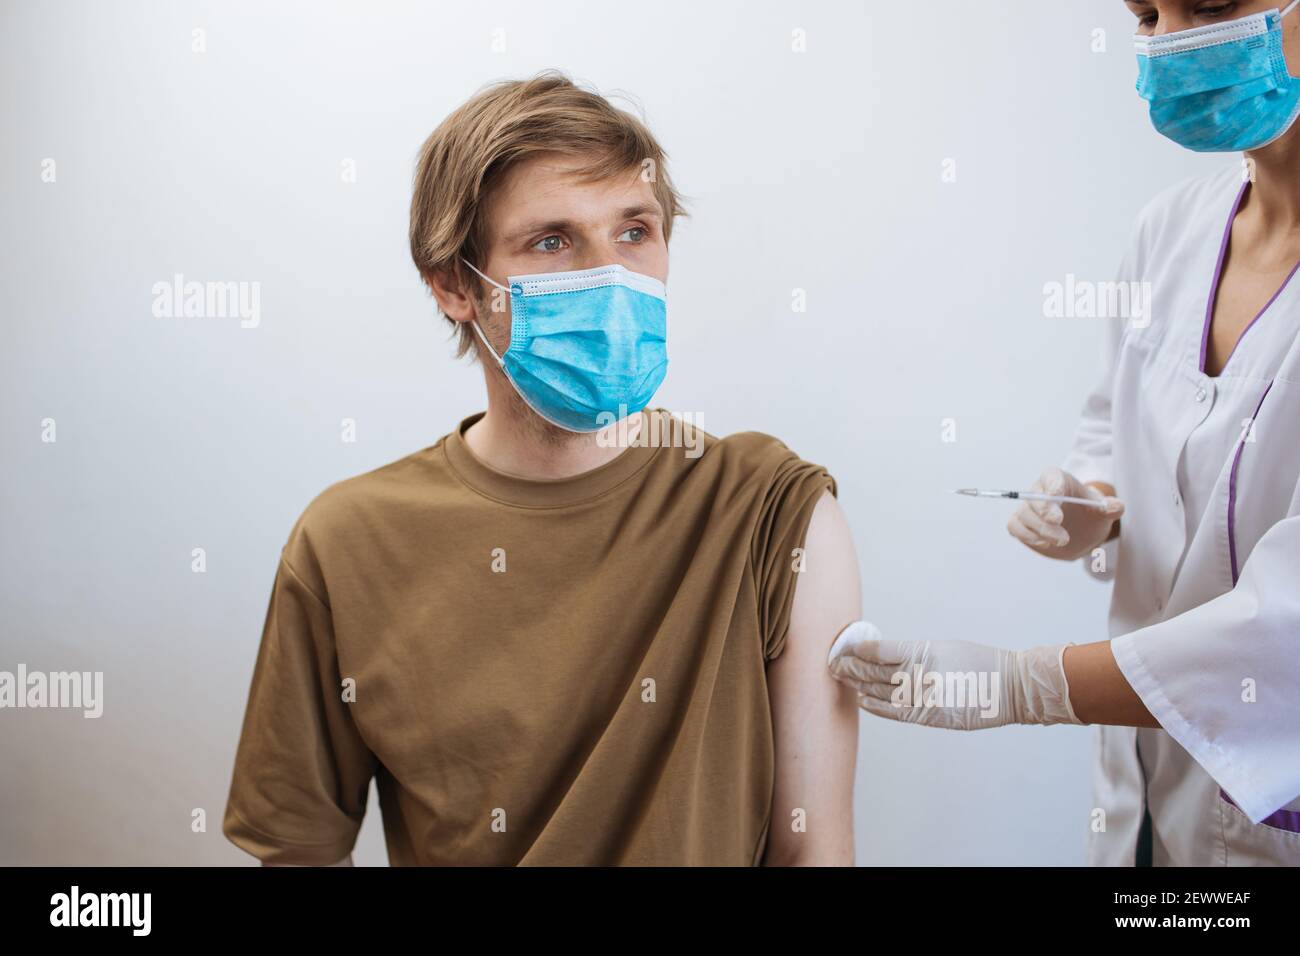 Male getting Covid-19 vaccine. Close up doctor making injection to patient in medical mask. Syringe of coronavirus vaccine. Man receives jab vaccinate Stock Photo